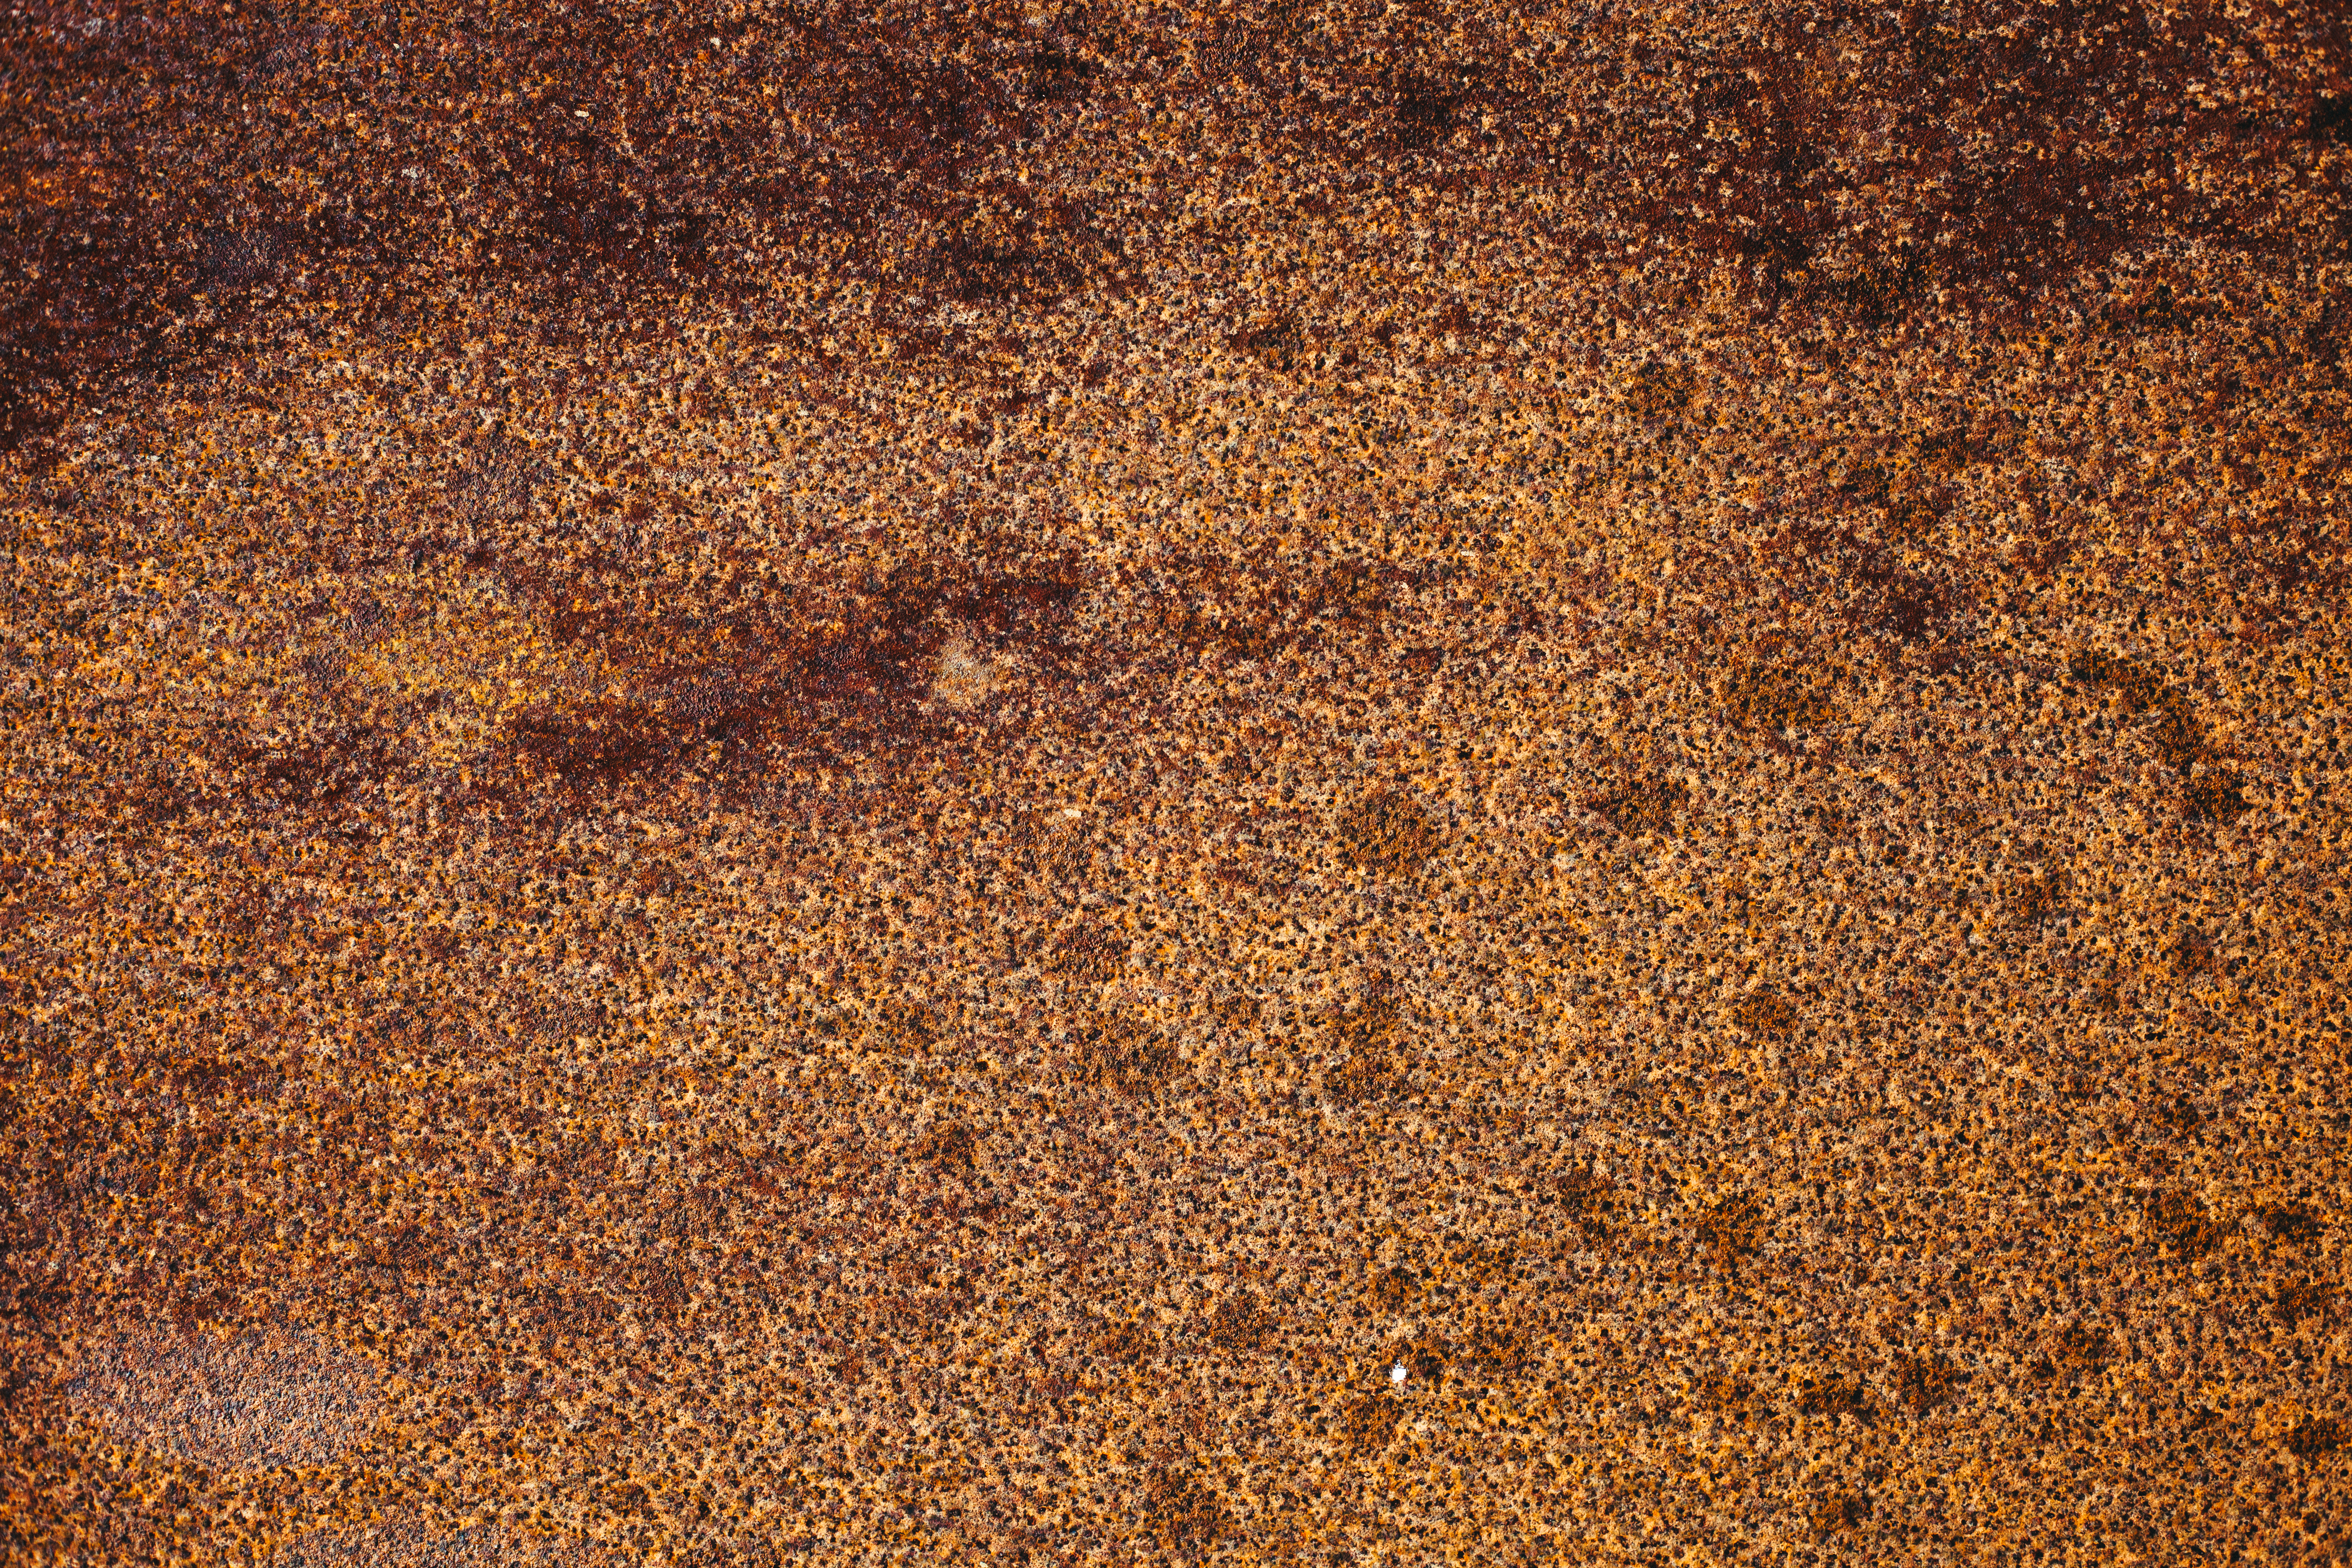 Rusty Metal Surface - Free Stock Photo by Free Texture Friday on ...